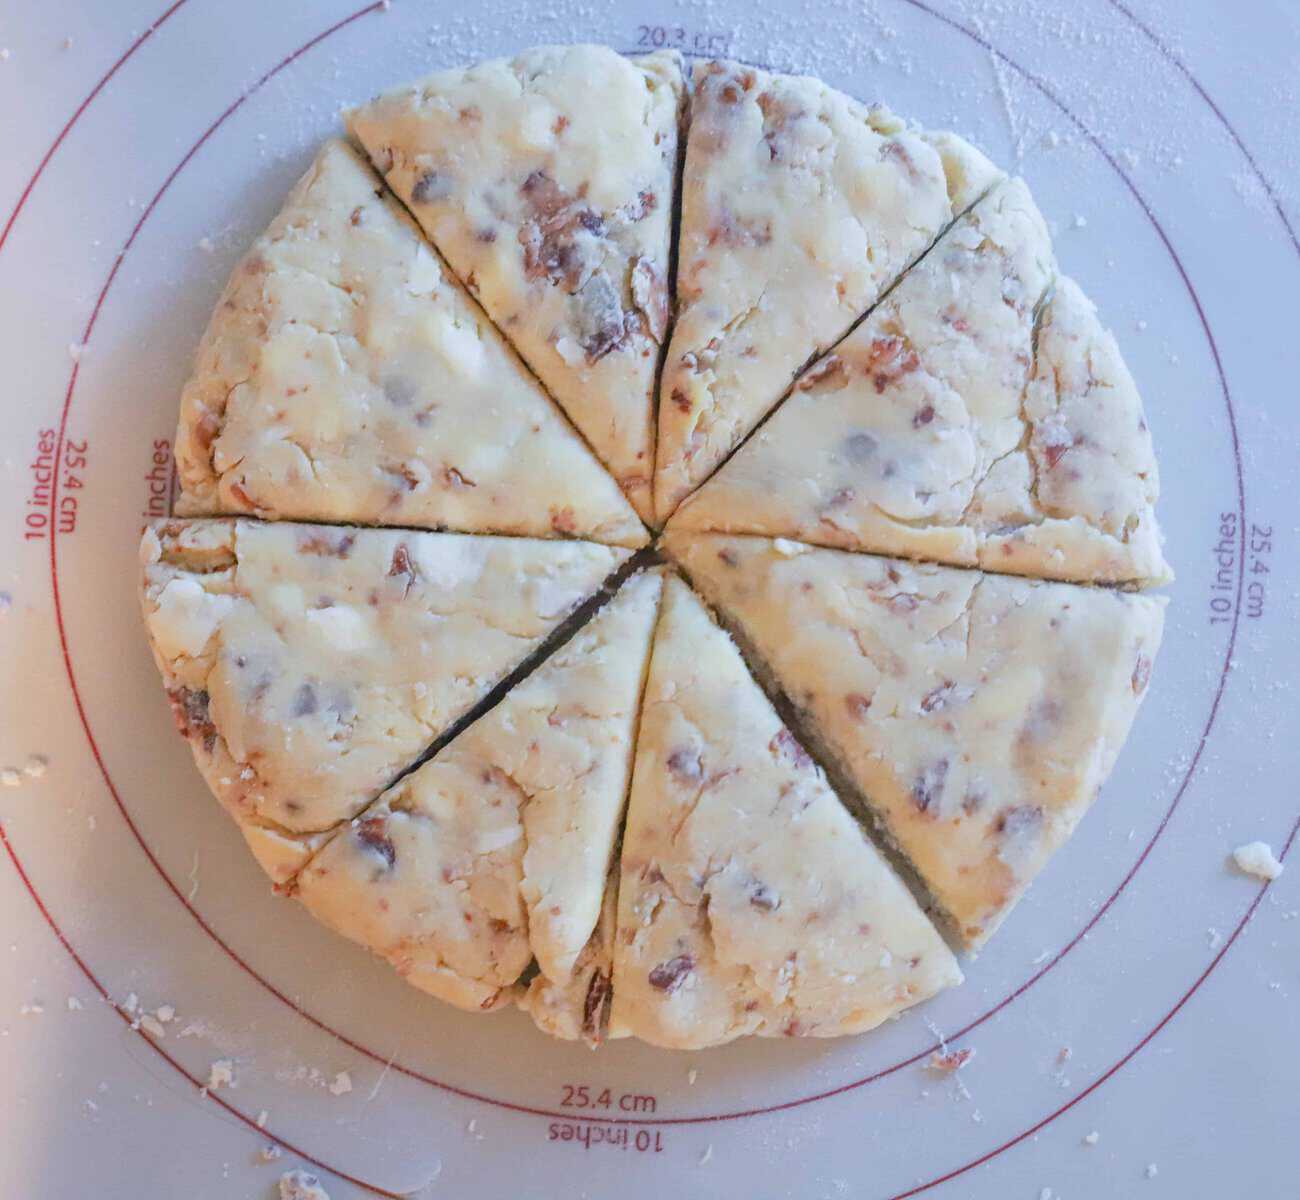 scone dough in a circle and cut into 8 wedges